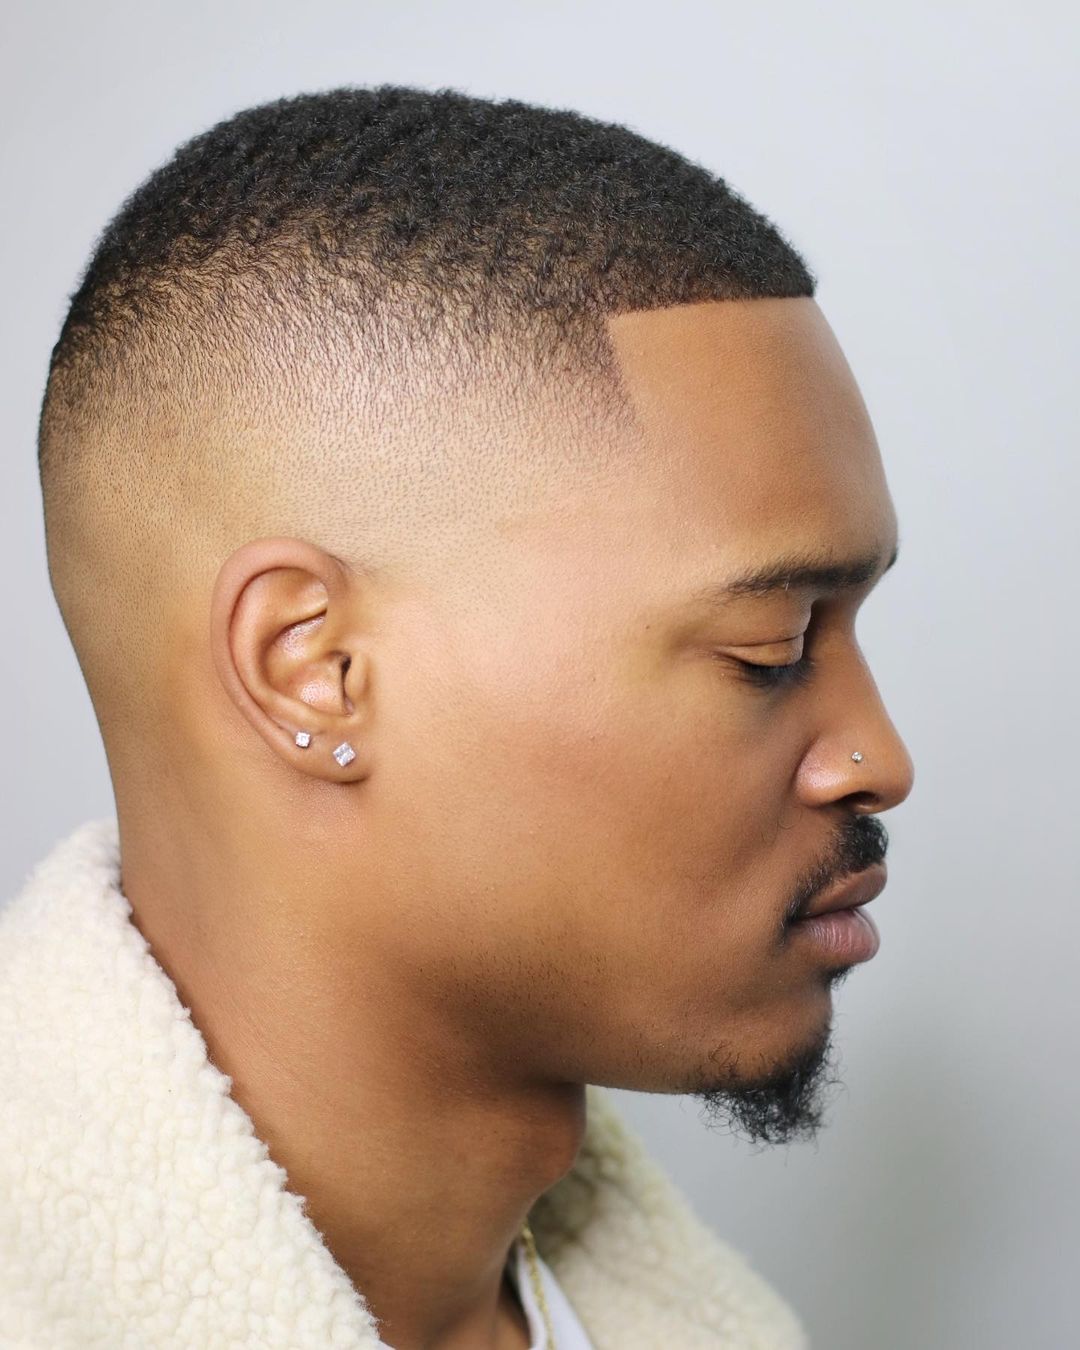 100+ Men's Fade Haircut Ideas: Best New Styles For July 2021